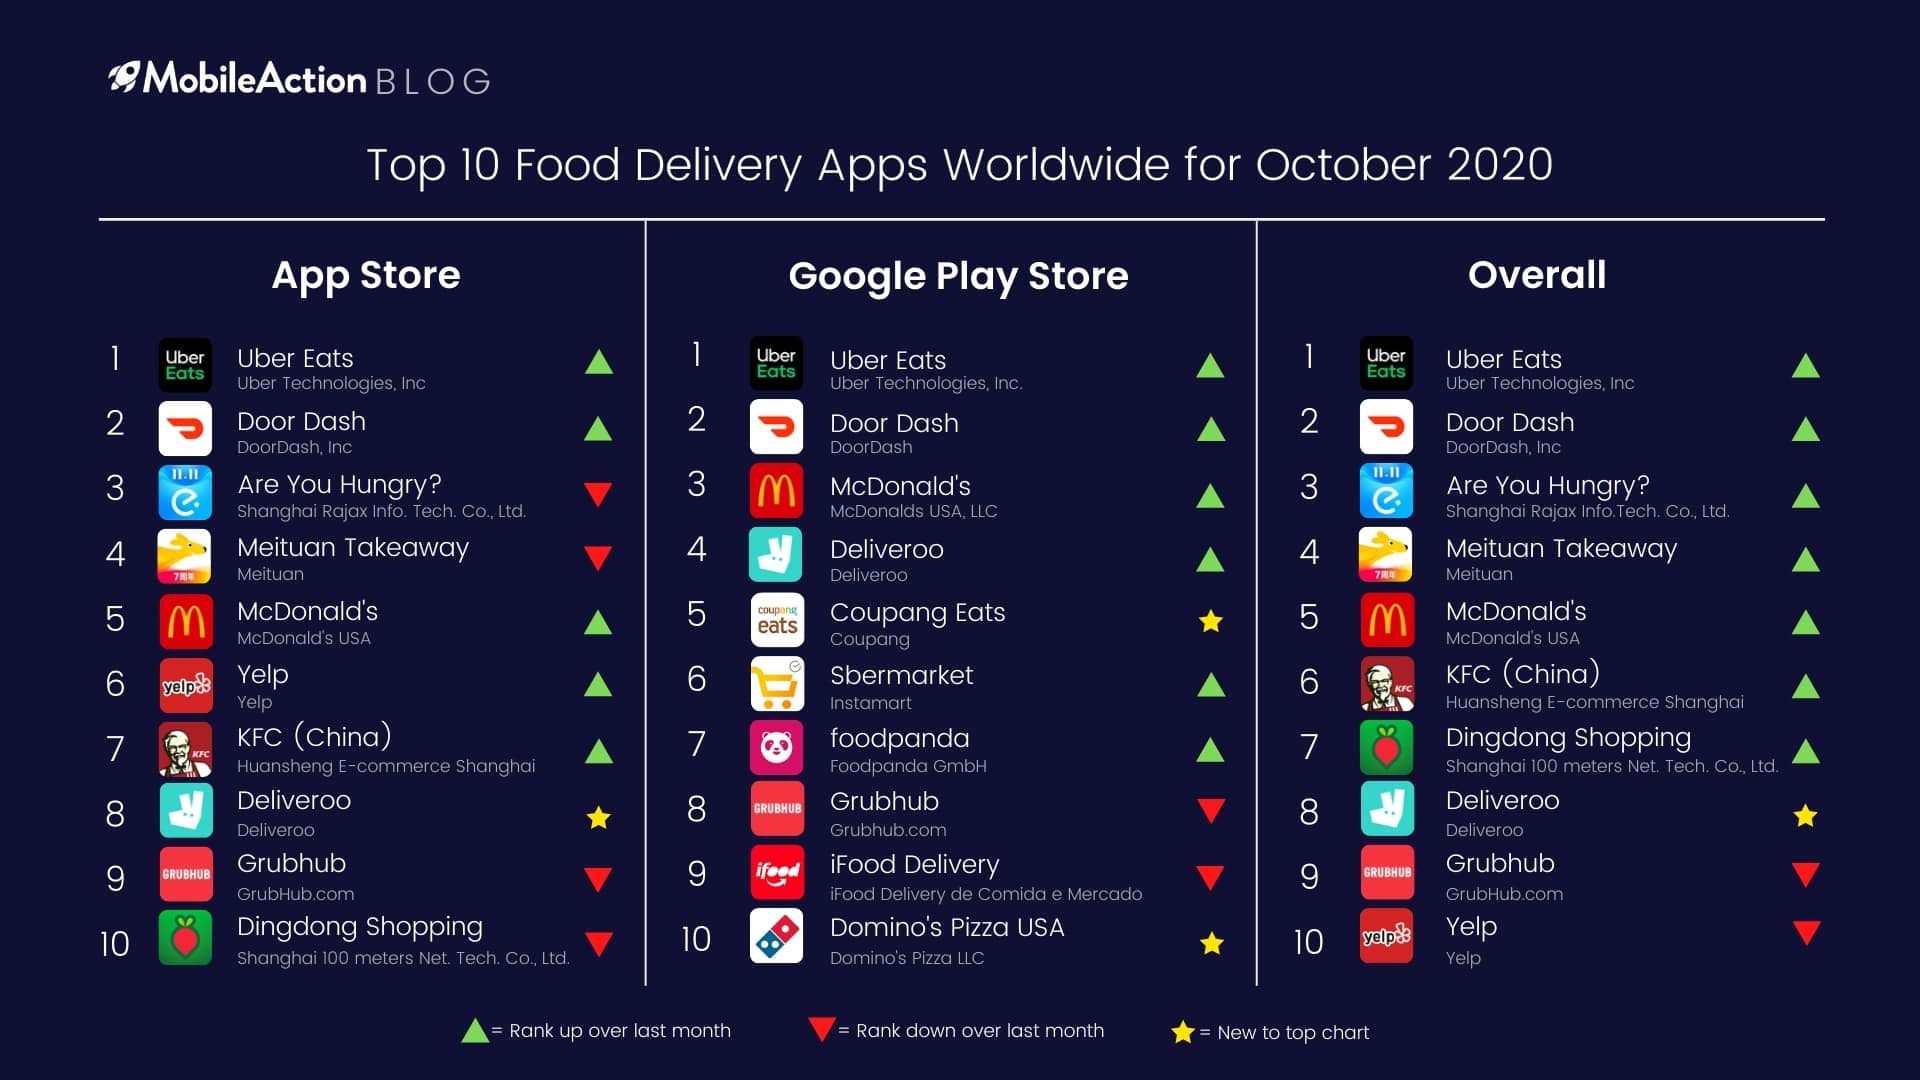 Top 10 Food Delivery Apps Worldwide for October 2020